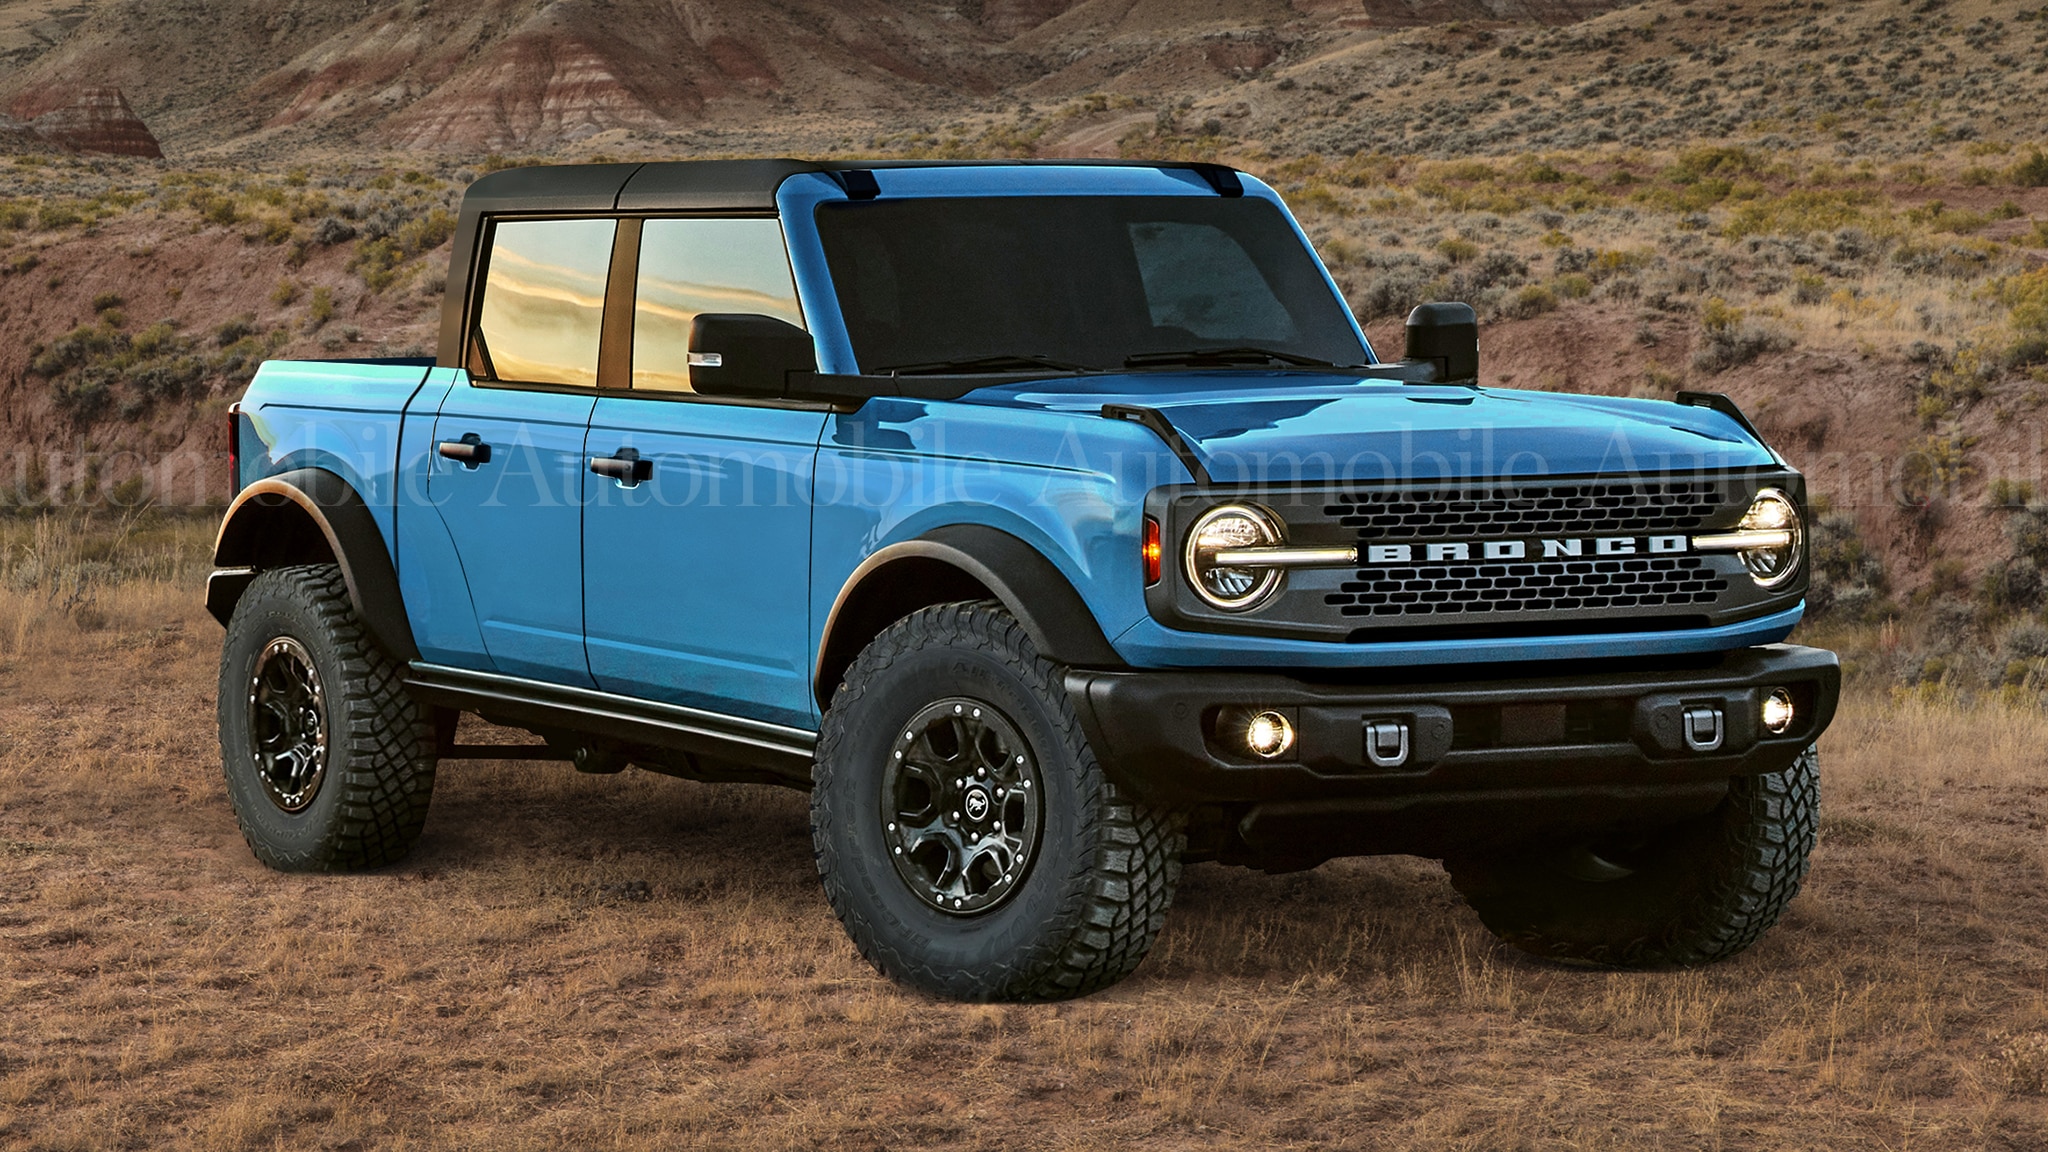 Pictures Of 2021 Ford Bronco Truck Specs, Redesigned - Specs, Interior